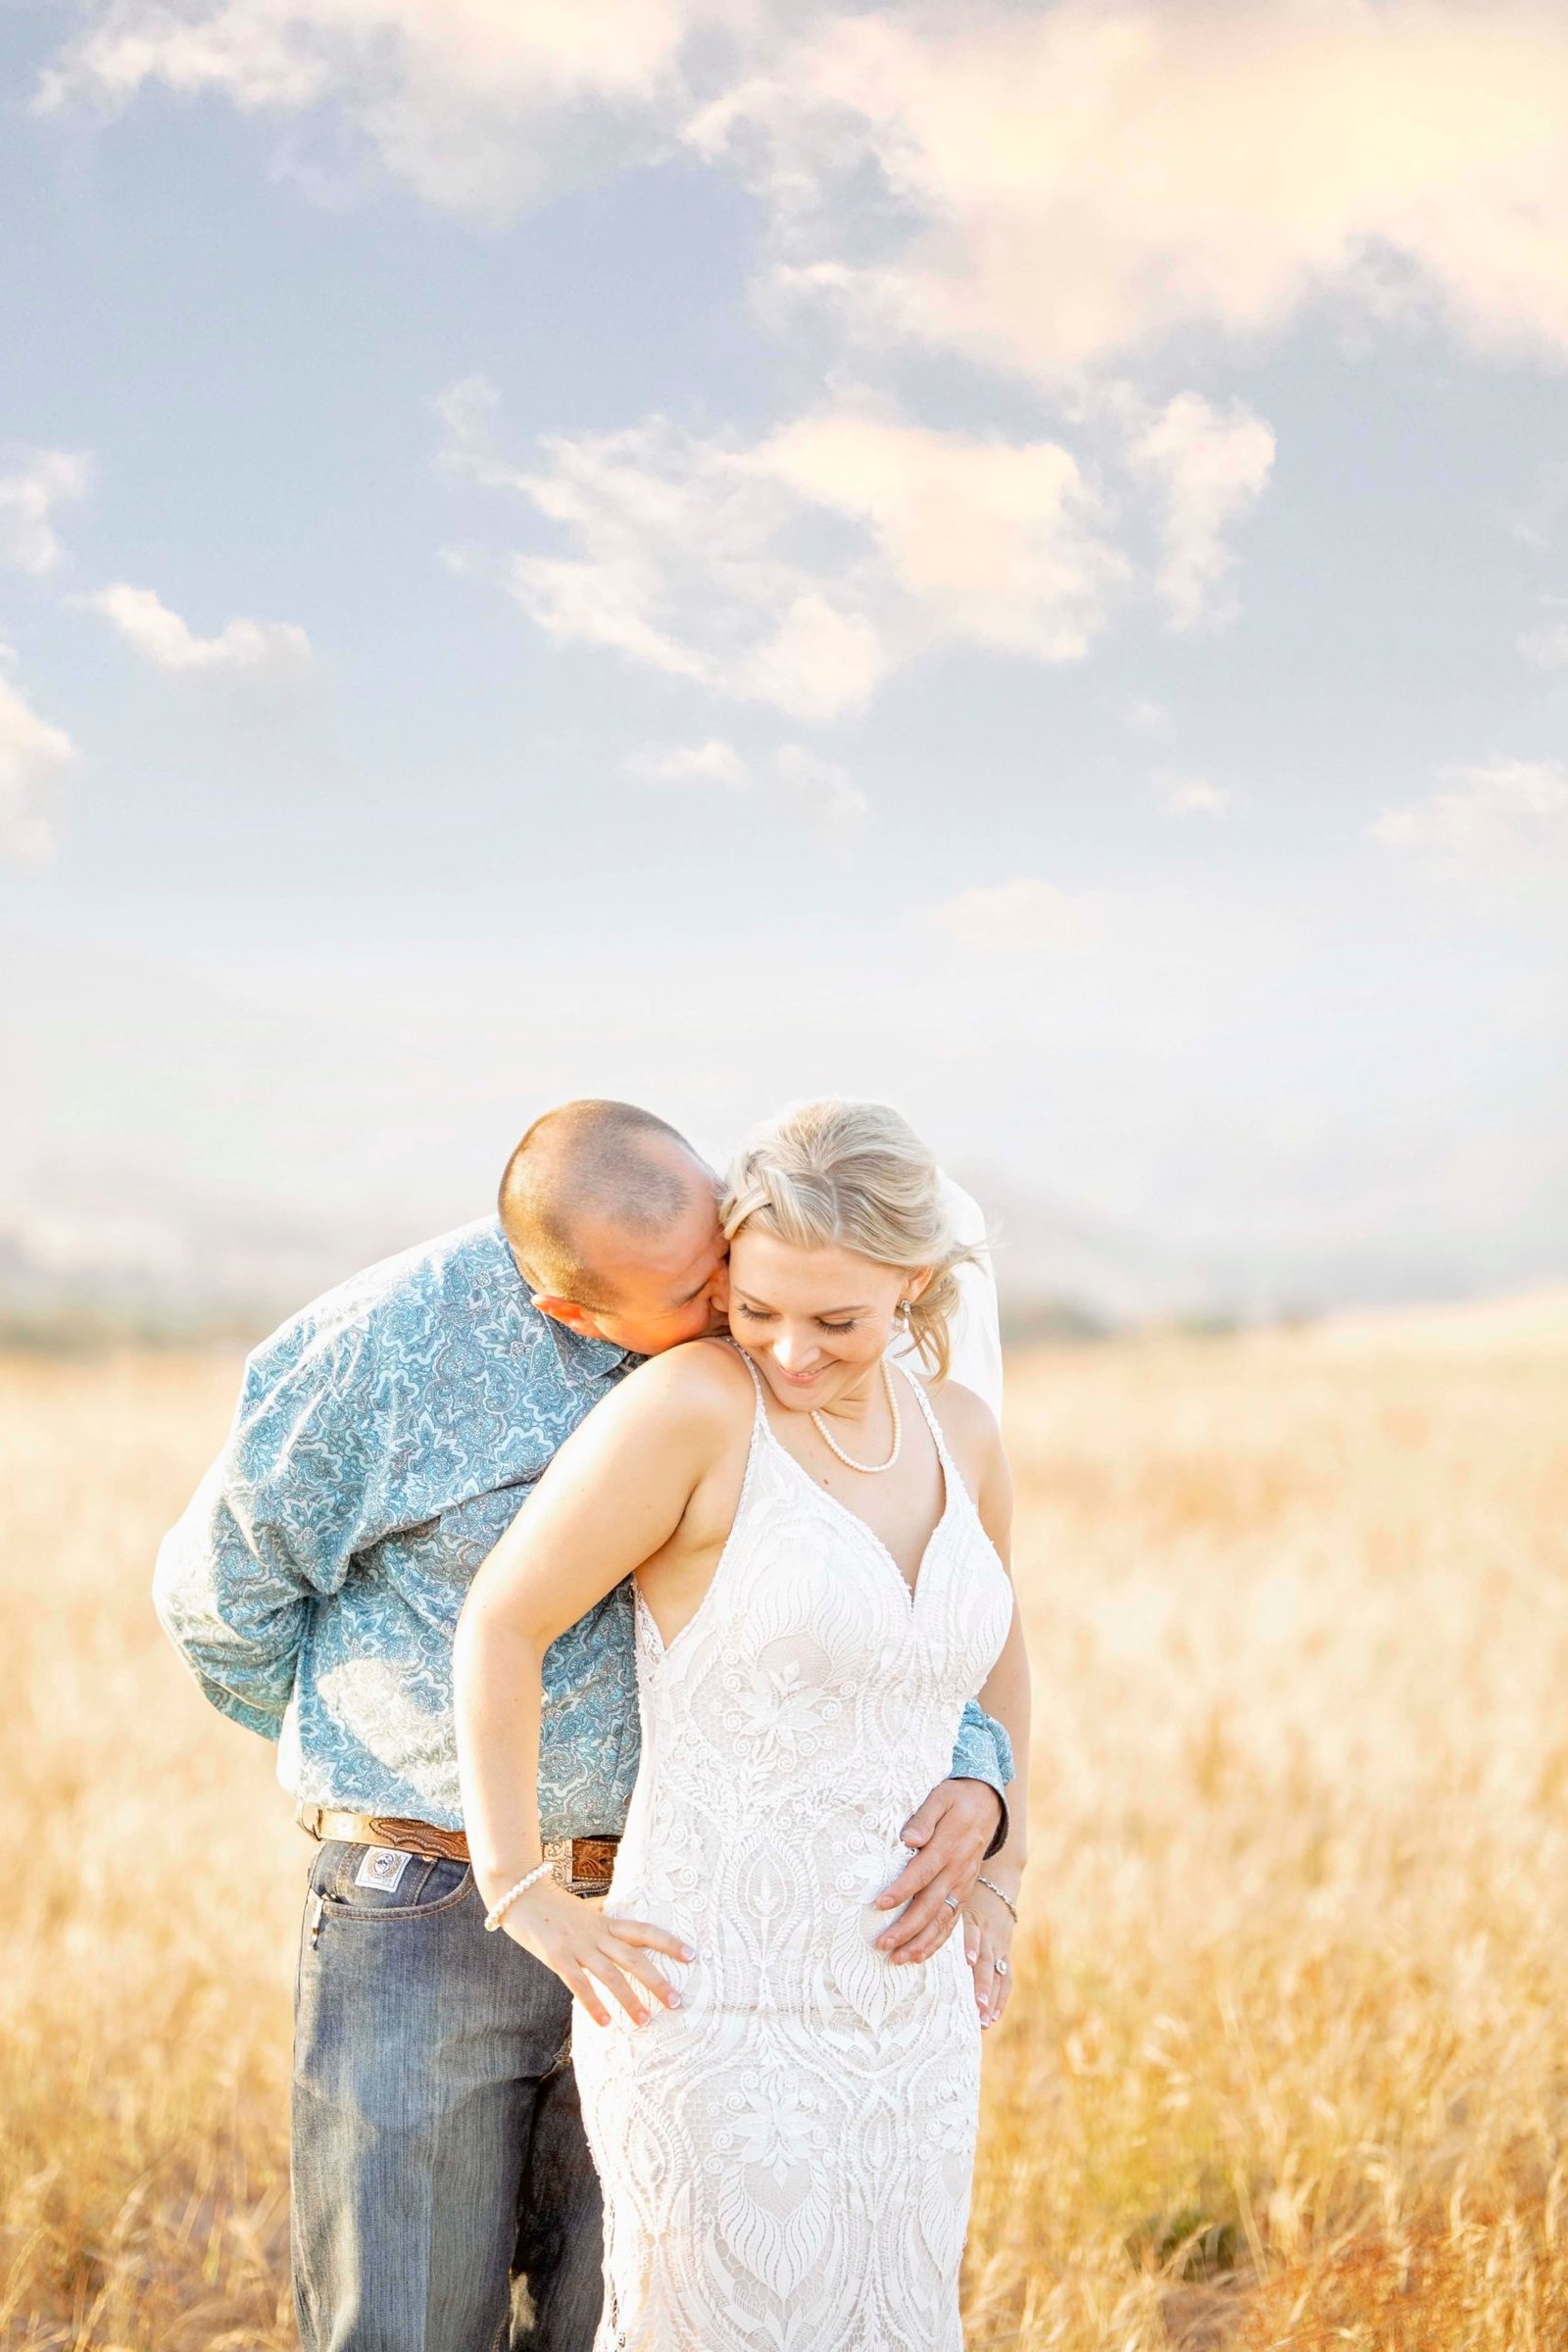 bride and groom in a grassy field